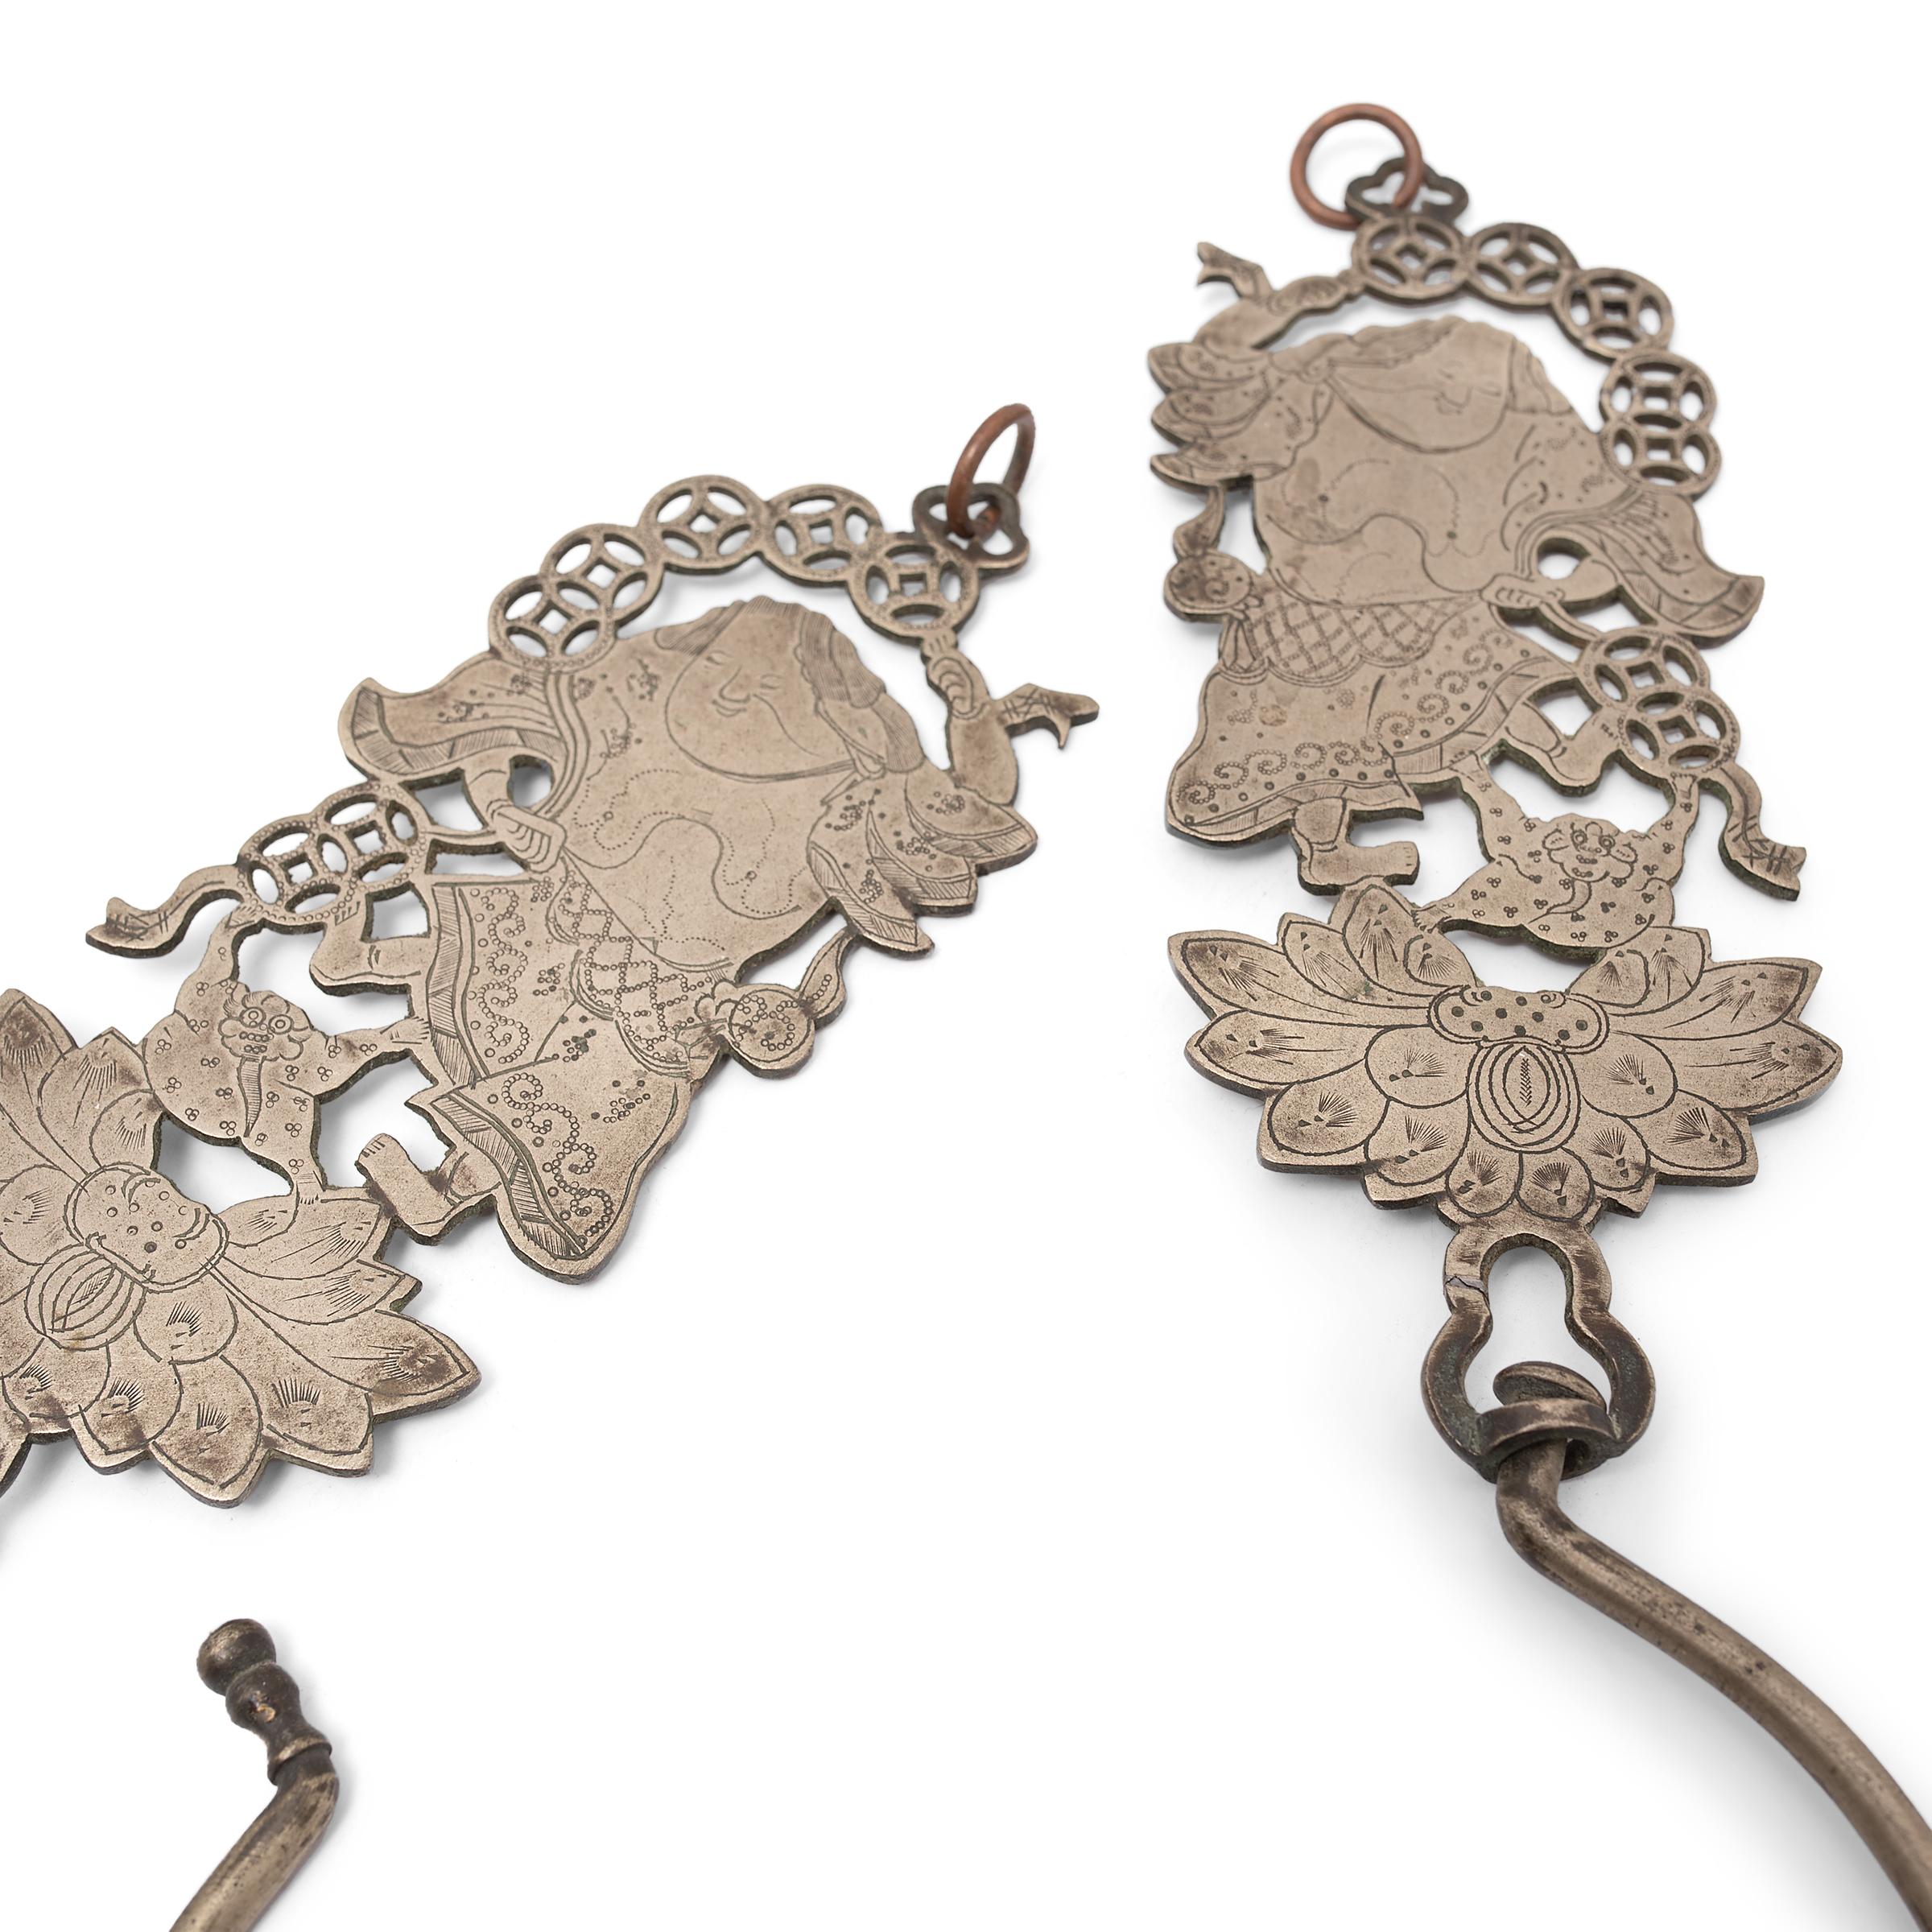 This fantastic pair of etched brass hooks recreates those used throughout the Qing dynasty to hold open the gauzy curtains of traditional canopy beds. Each of the large hooks is affixed to an etching of the Daoist immortal Liu Hai and his animal